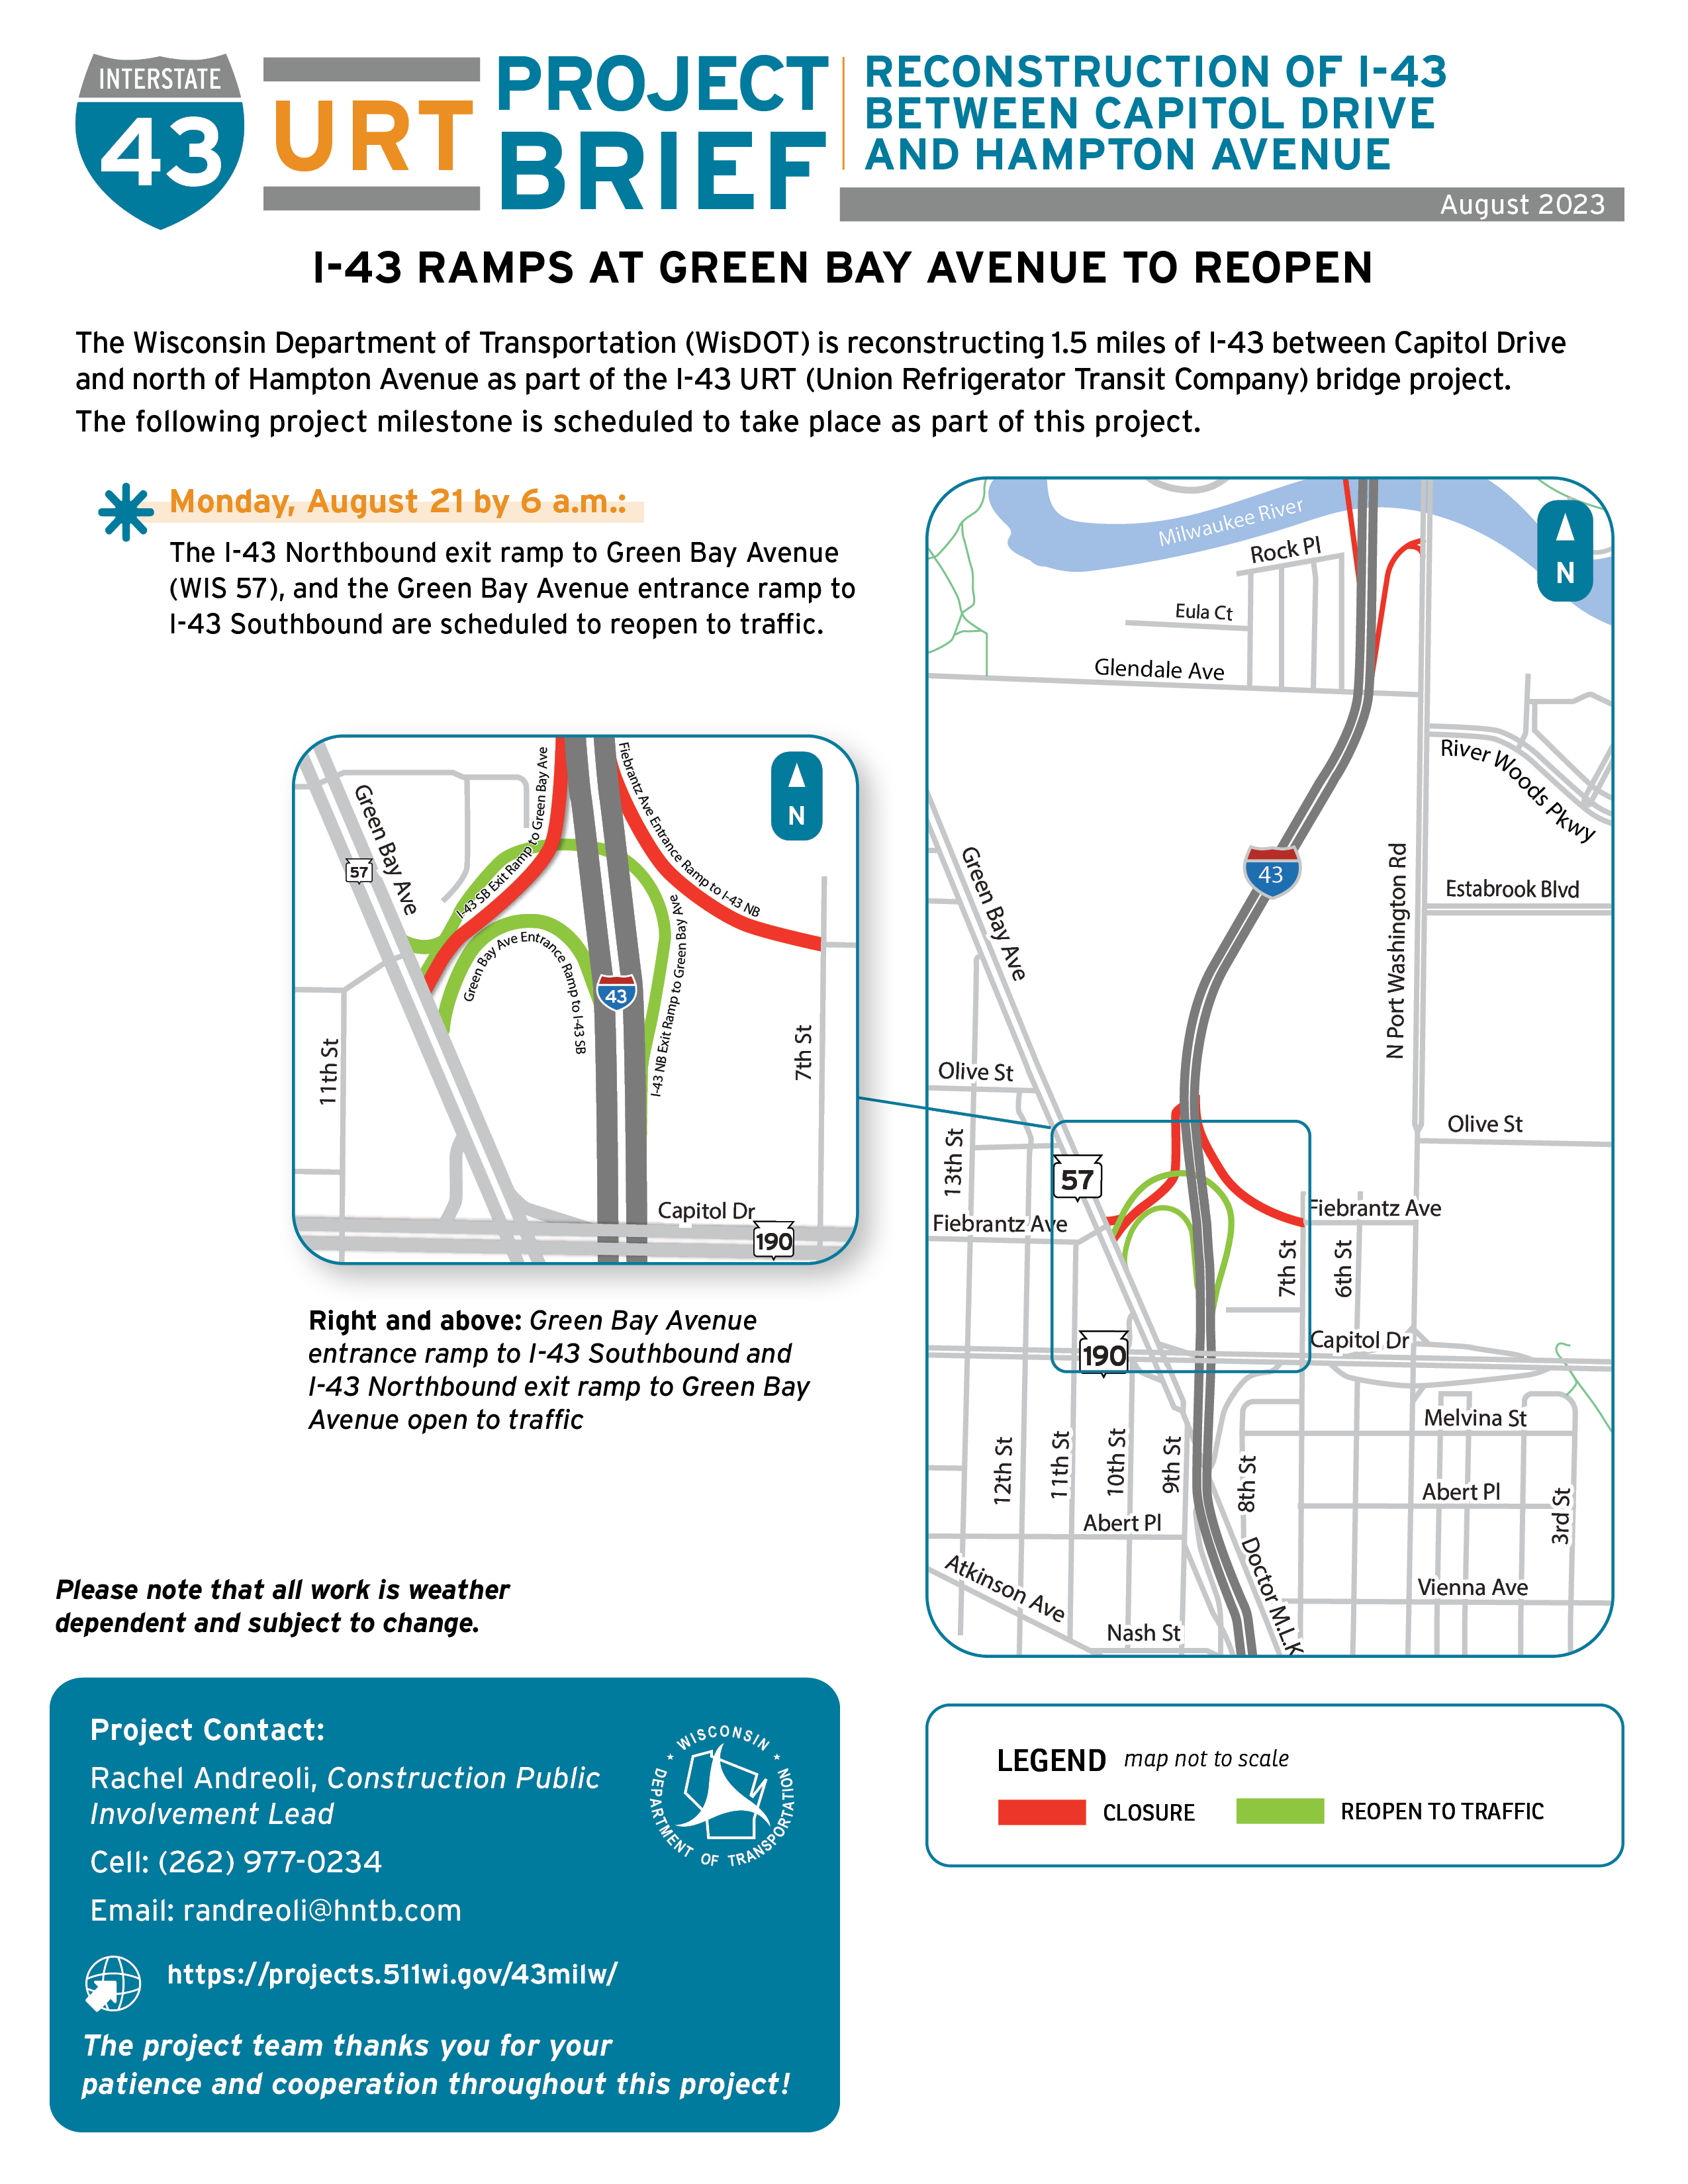 August 21, I-43 Ramps at Green Bay Avenue to Reopen